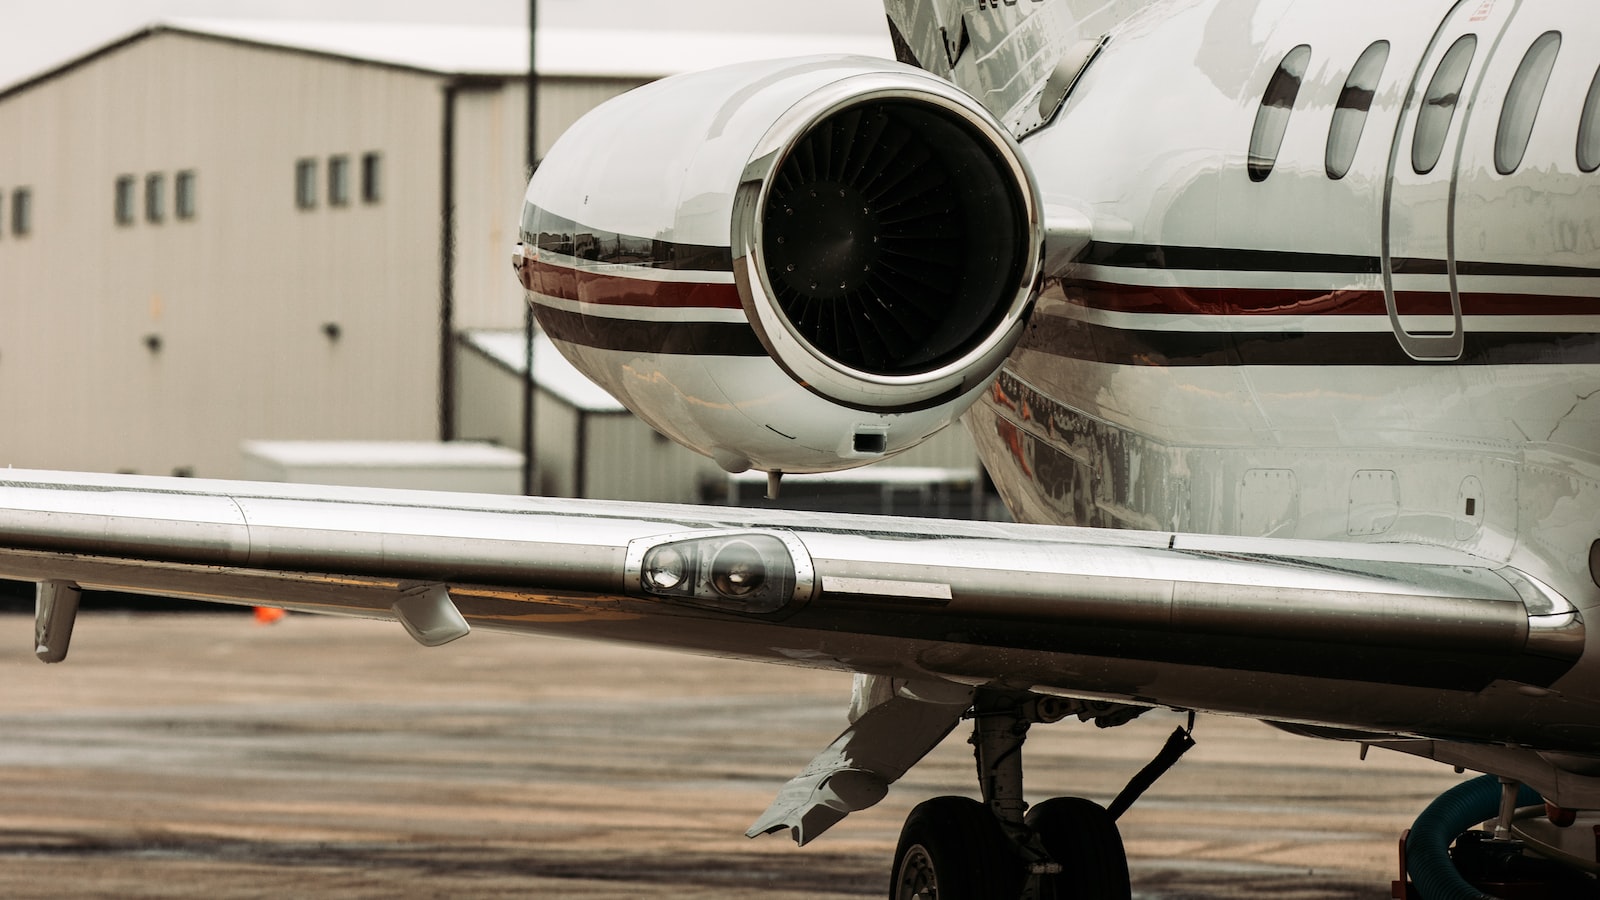 Tips to Optimize Speed and Efficiency for Your Private Jet Experience